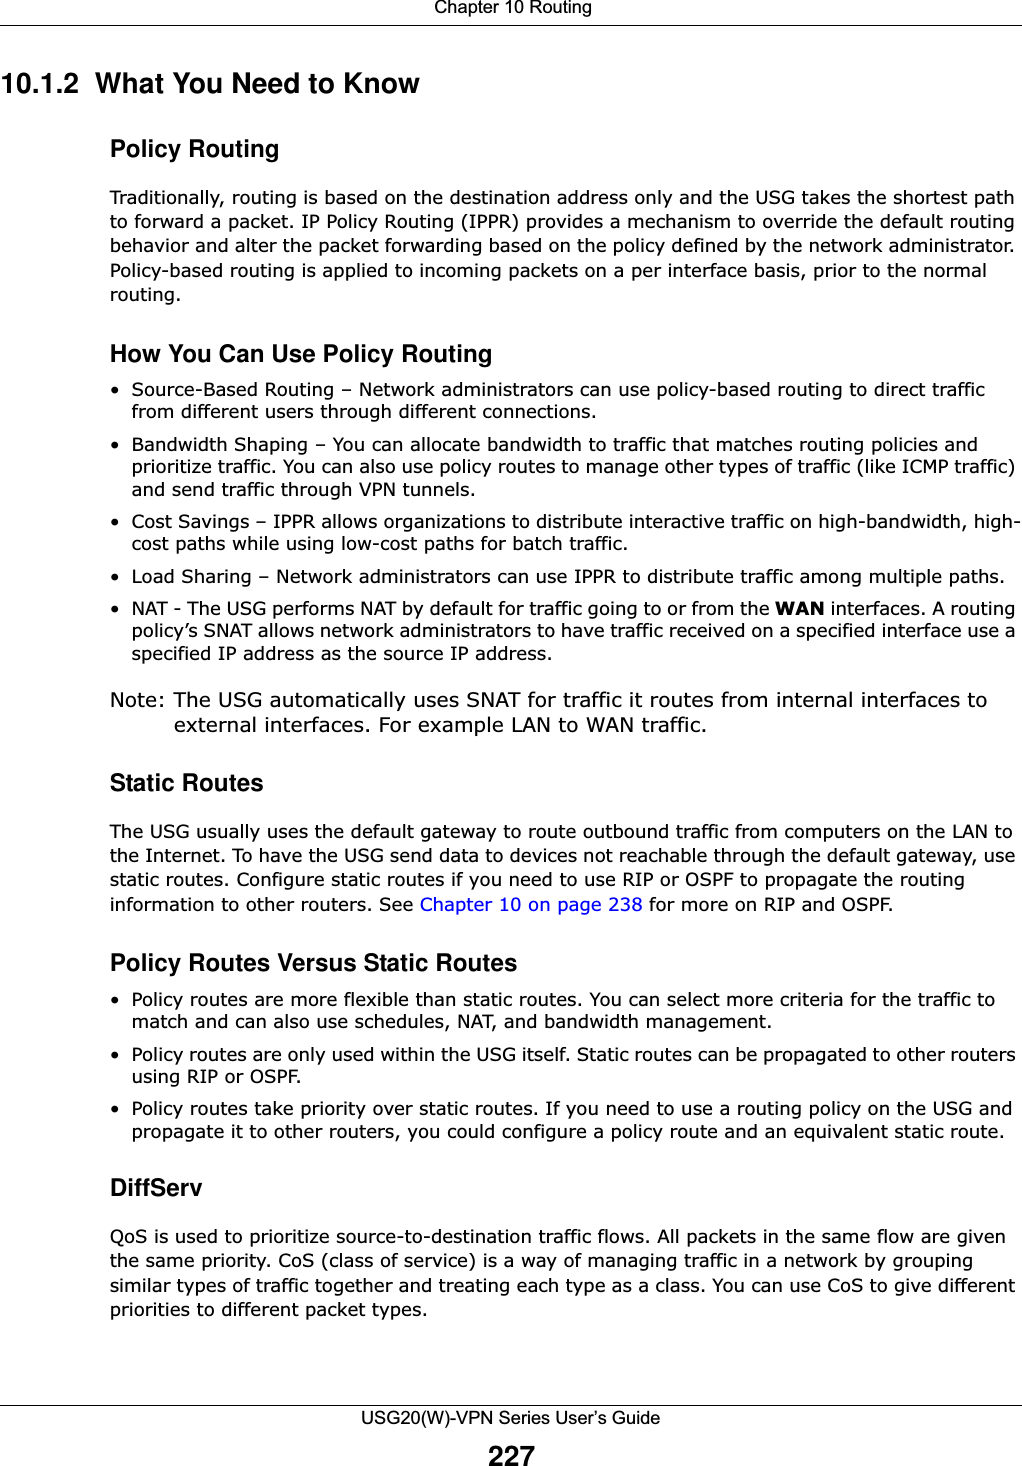  Chapter 10 RoutingUSG20(W)-VPN Series User’s Guide22710.1.2  What You Need to Know  Policy RoutingTraditionally, routing is based on the destination address only and the USG takes the shortest path to forward a packet. IP Policy Routing (IPPR) provides a mechanism to override the default routing behavior and alter the packet forwarding based on the policy defined by the network administrator. Policy-based routing is applied to incoming packets on a per interface basis, prior to the normal routing.How You Can Use Policy Routing• Source-Based Routing – Network administrators can use policy-based routing to direct traffic from different users through different connections.• Bandwidth Shaping – You can allocate bandwidth to traffic that matches routing policies and prioritize traffic. You can also use policy routes to manage other types of traffic (like ICMP traffic) and send traffic through VPN tunnels.• Cost Savings – IPPR allows organizations to distribute interactive traffic on high-bandwidth, high-cost paths while using low-cost paths for batch traffic.• Load Sharing – Network administrators can use IPPR to distribute traffic among multiple paths.• NAT - The USG performs NAT by default for traffic going to or from the WAN interfaces. A routing policy’s SNAT allows network administrators to have traffic received on a specified interface use a specified IP address as the source IP address.Note: The USG automatically uses SNAT for traffic it routes from internal interfaces to external interfaces. For example LAN to WAN traffic.Static RoutesThe USG usually uses the default gateway to route outbound traffic from computers on the LAN to the Internet. To have the USG send data to devices not reachable through the default gateway, use static routes. Configure static routes if you need to use RIP or OSPF to propagate the routing information to other routers. See Chapter 10 on page 238 for more on RIP and OSPF.Policy Routes Versus Static Routes• Policy routes are more flexible than static routes. You can select more criteria for the traffic to match and can also use schedules, NAT, and bandwidth management.• Policy routes are only used within the USG itself. Static routes can be propagated to other routers using RIP or OSPF. • Policy routes take priority over static routes. If you need to use a routing policy on the USG and propagate it to other routers, you could configure a policy route and an equivalent static route.DiffServQoS is used to prioritize source-to-destination traffic flows. All packets in the same flow are given the same priority. CoS (class of service) is a way of managing traffic in a network by grouping similar types of traffic together and treating each type as a class. You can use CoS to give different priorities to different packet types. 